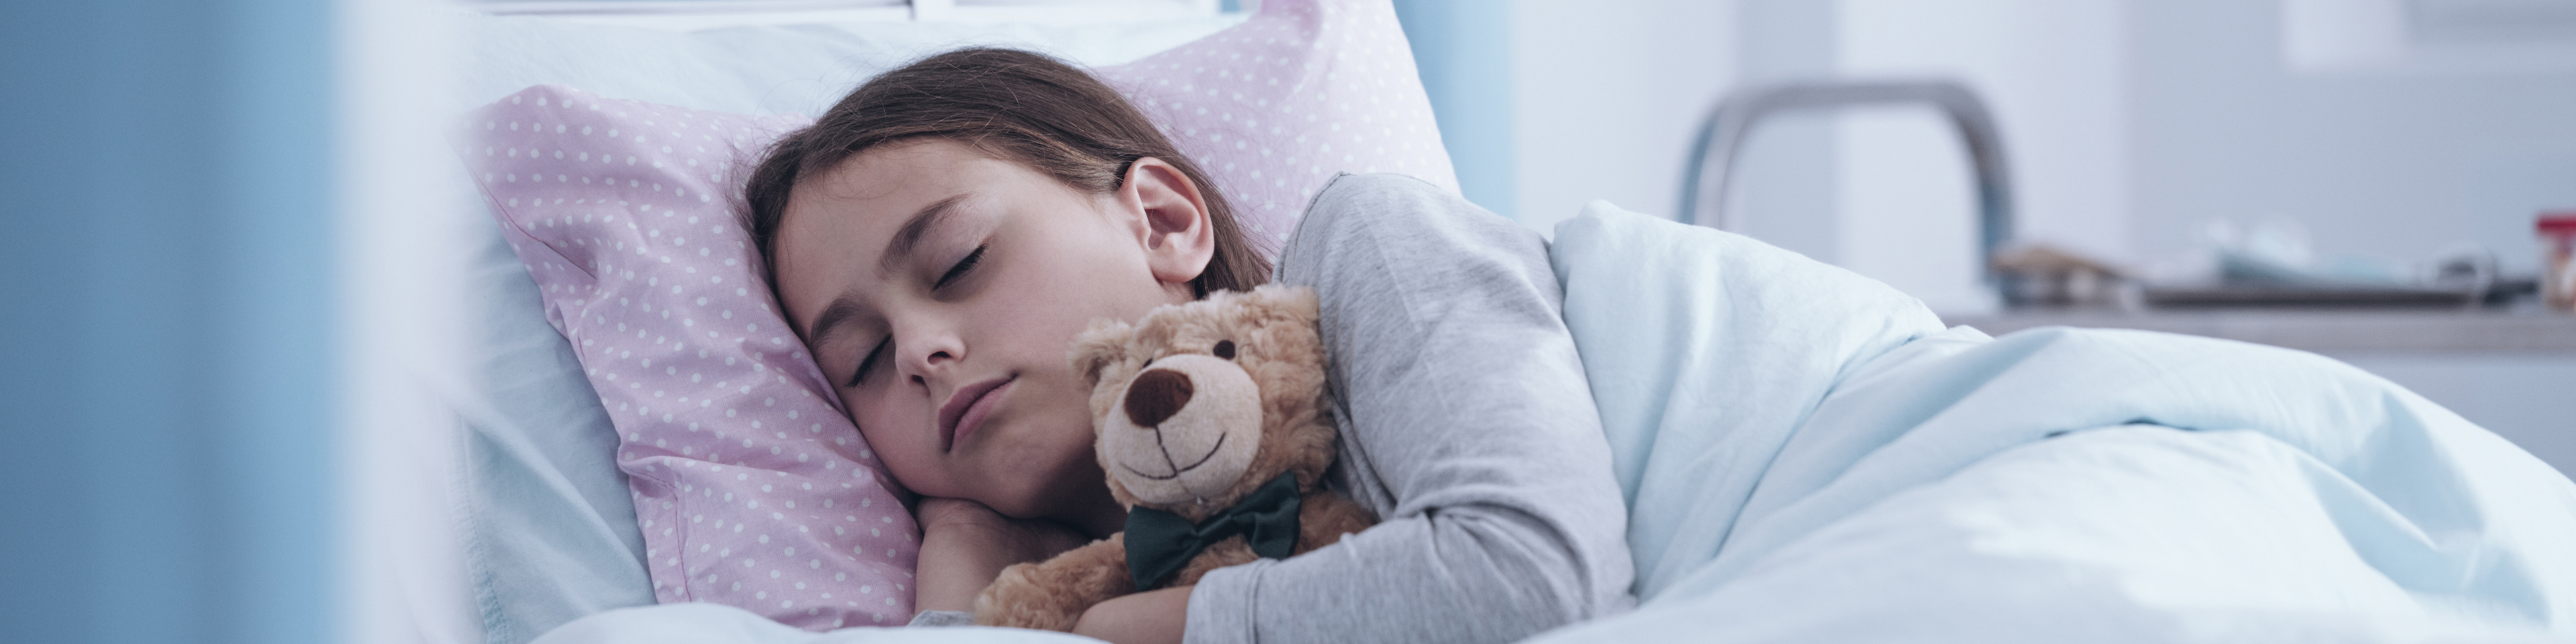 Child snuggling teddy bear while sleeping in hospital bed